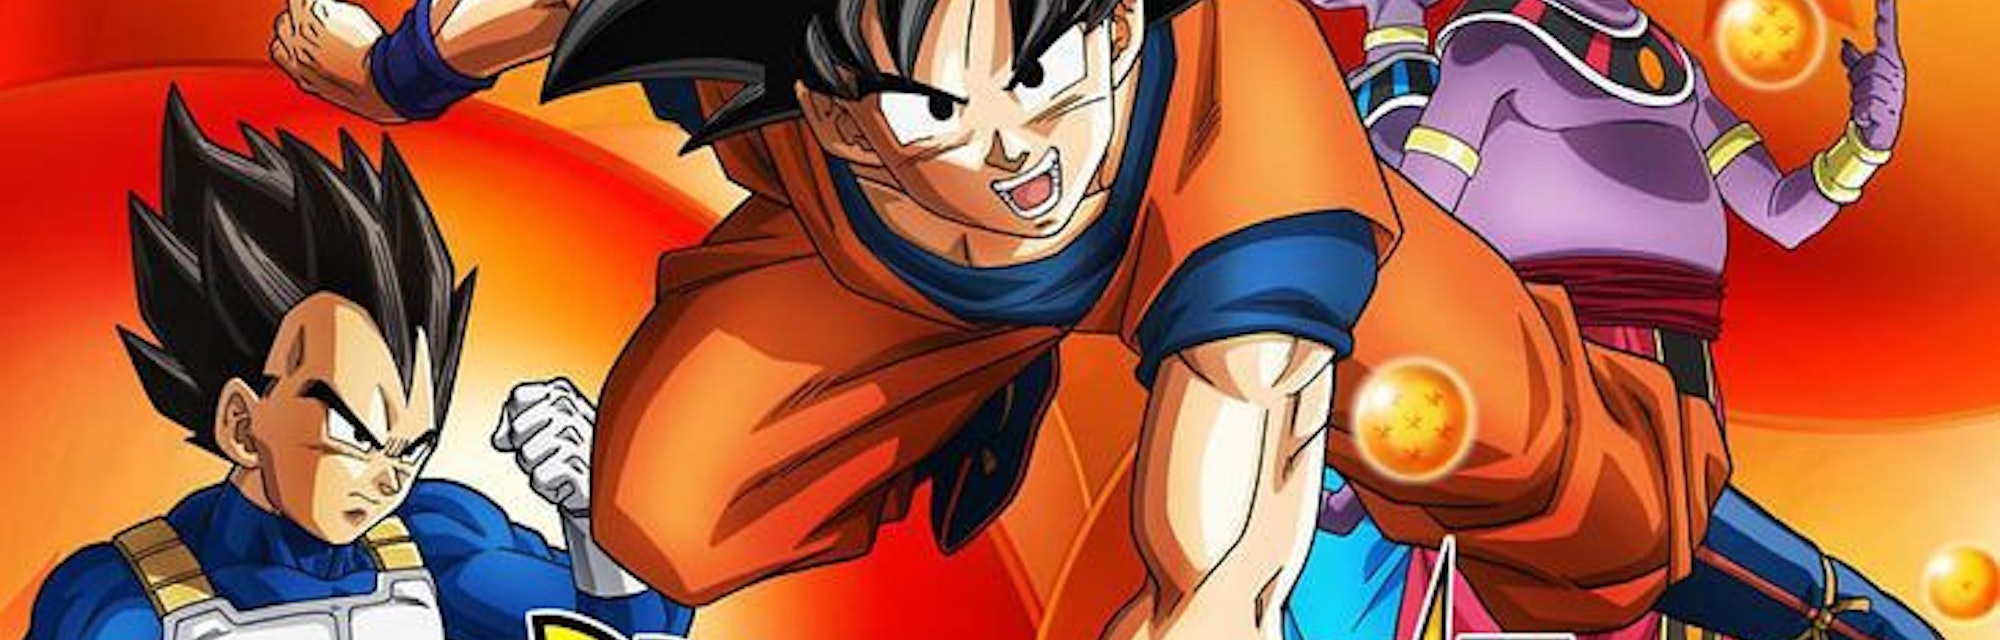 Dragon Ball Super Officially Brings Back The Dbz Voice Cast